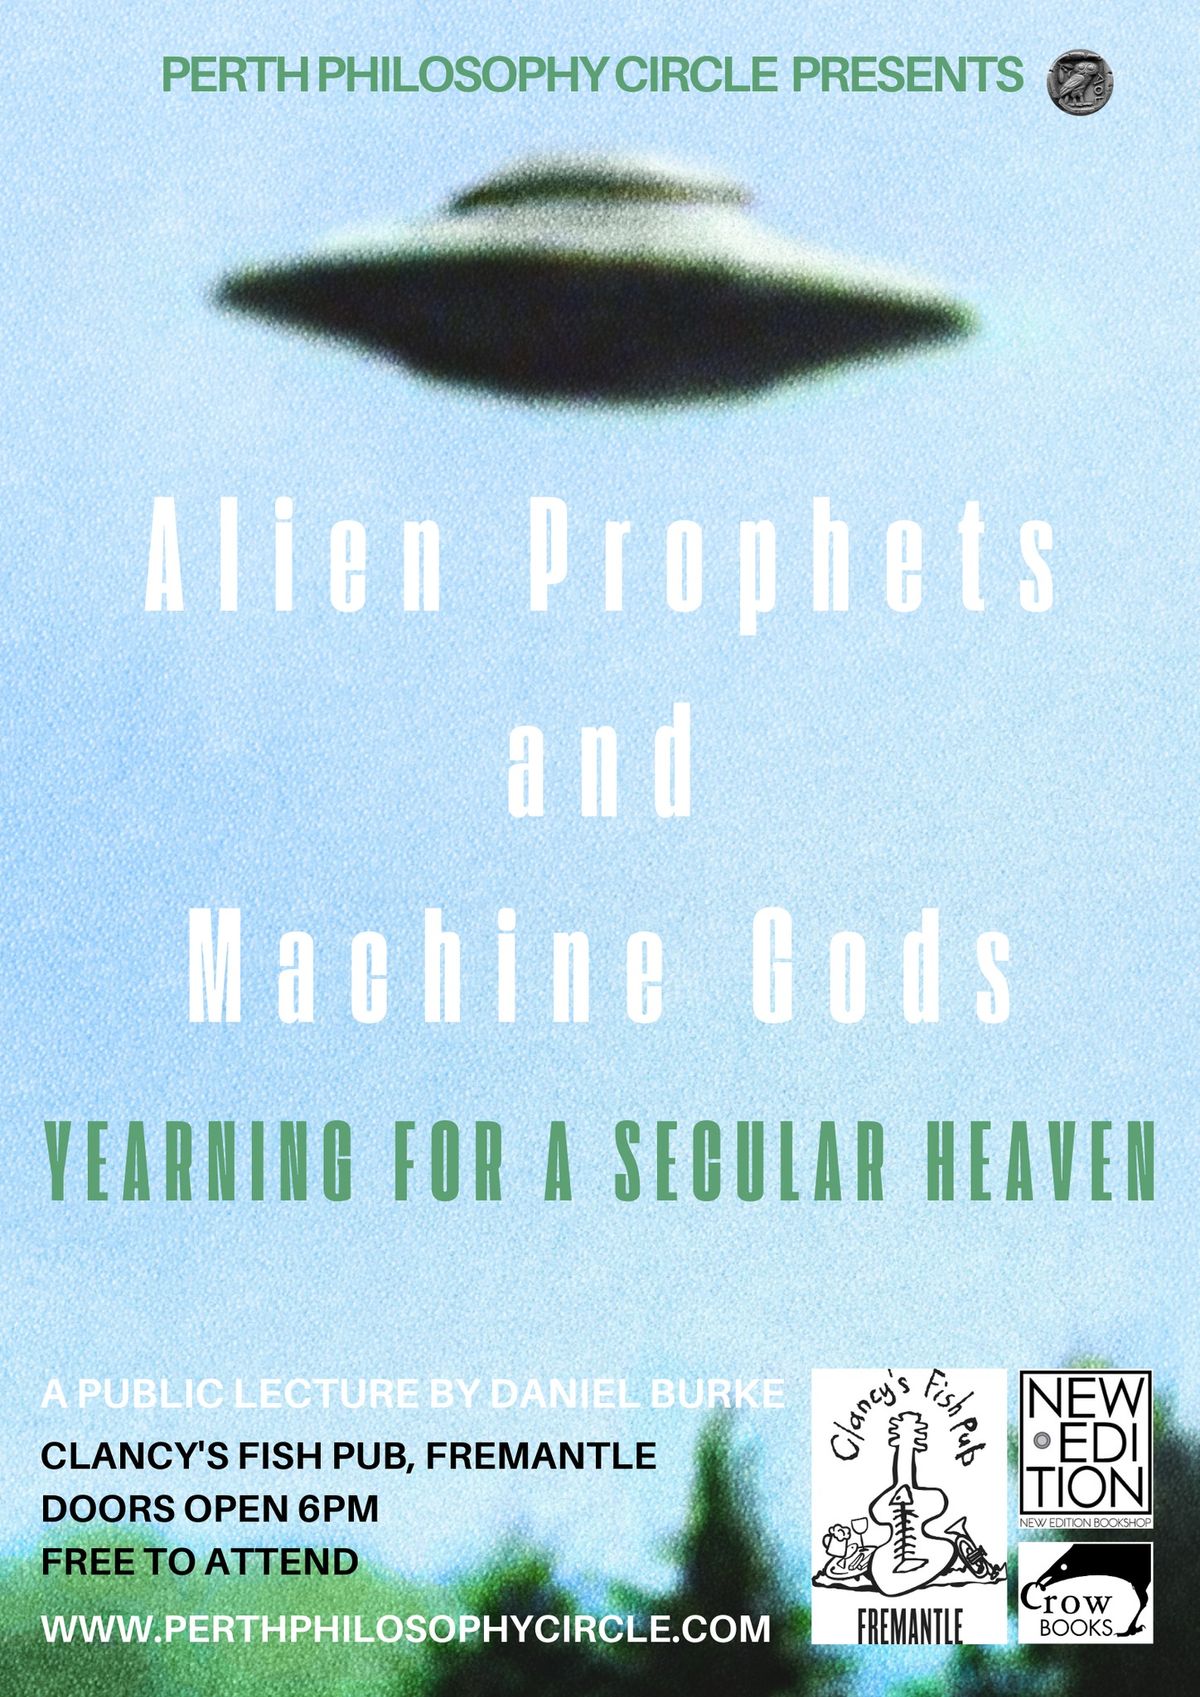 Perth Philosophy Circle Lecture 2 - Alien Prophets and Machine Gods